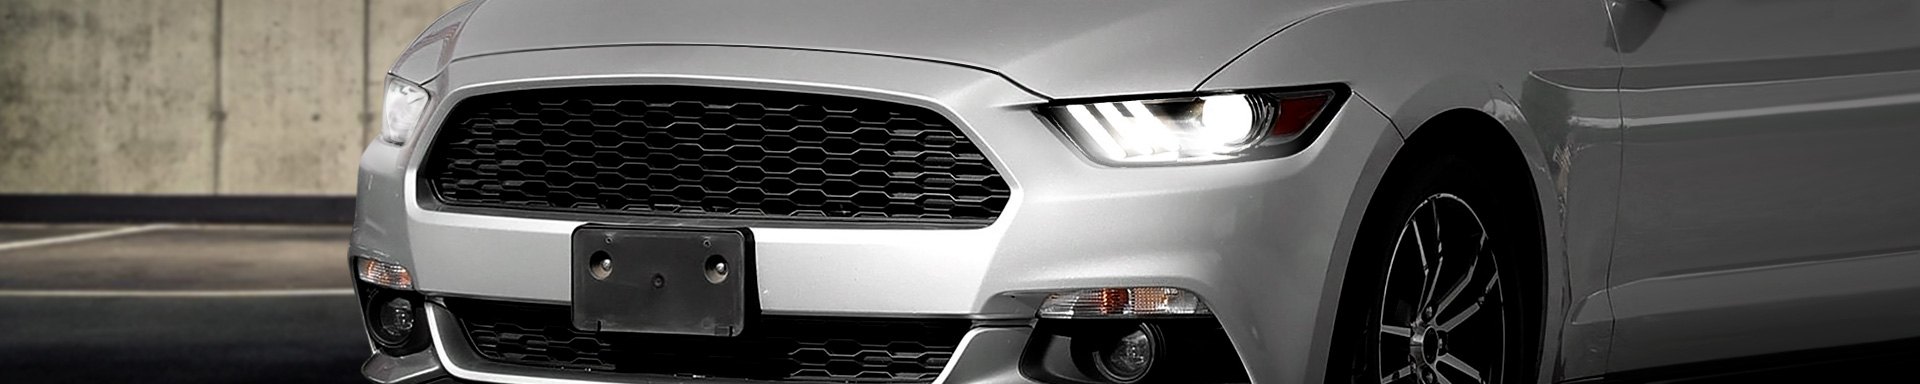 Illuminate Your Way With New Spec-D LED DRL Bar Projector Headlights For Stang